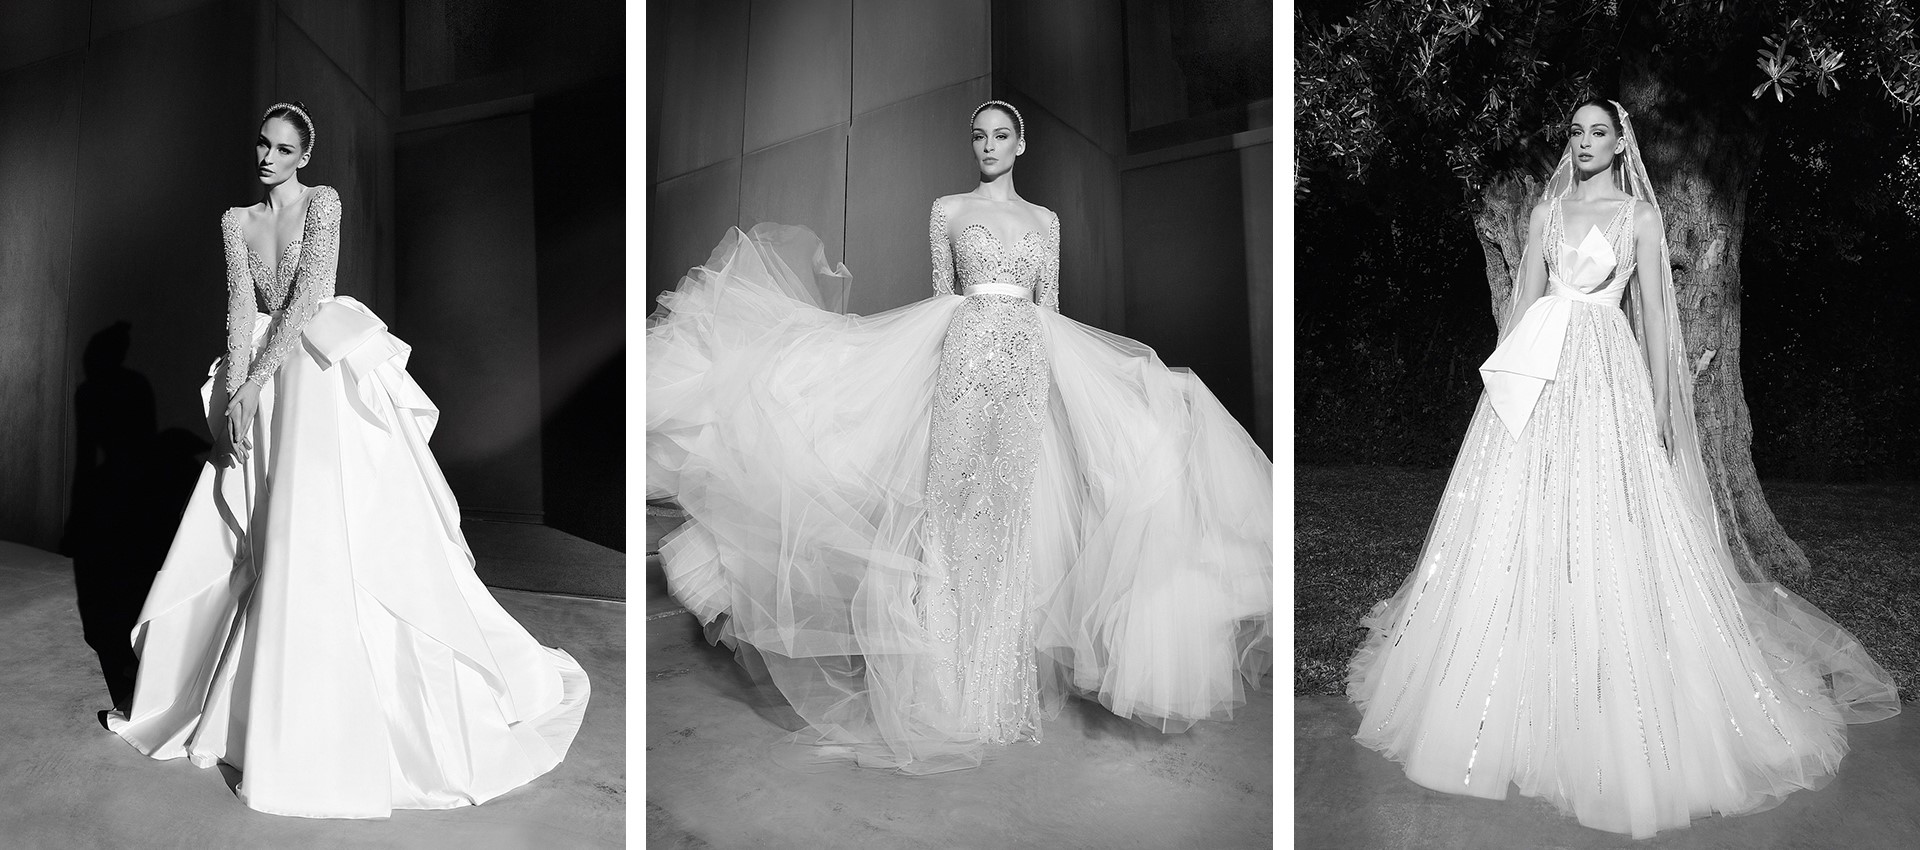 Exquisite bridal gowns by Zuhair Murad for luxury weddings and parties planned by Bond wedding planner in Greece and Italy